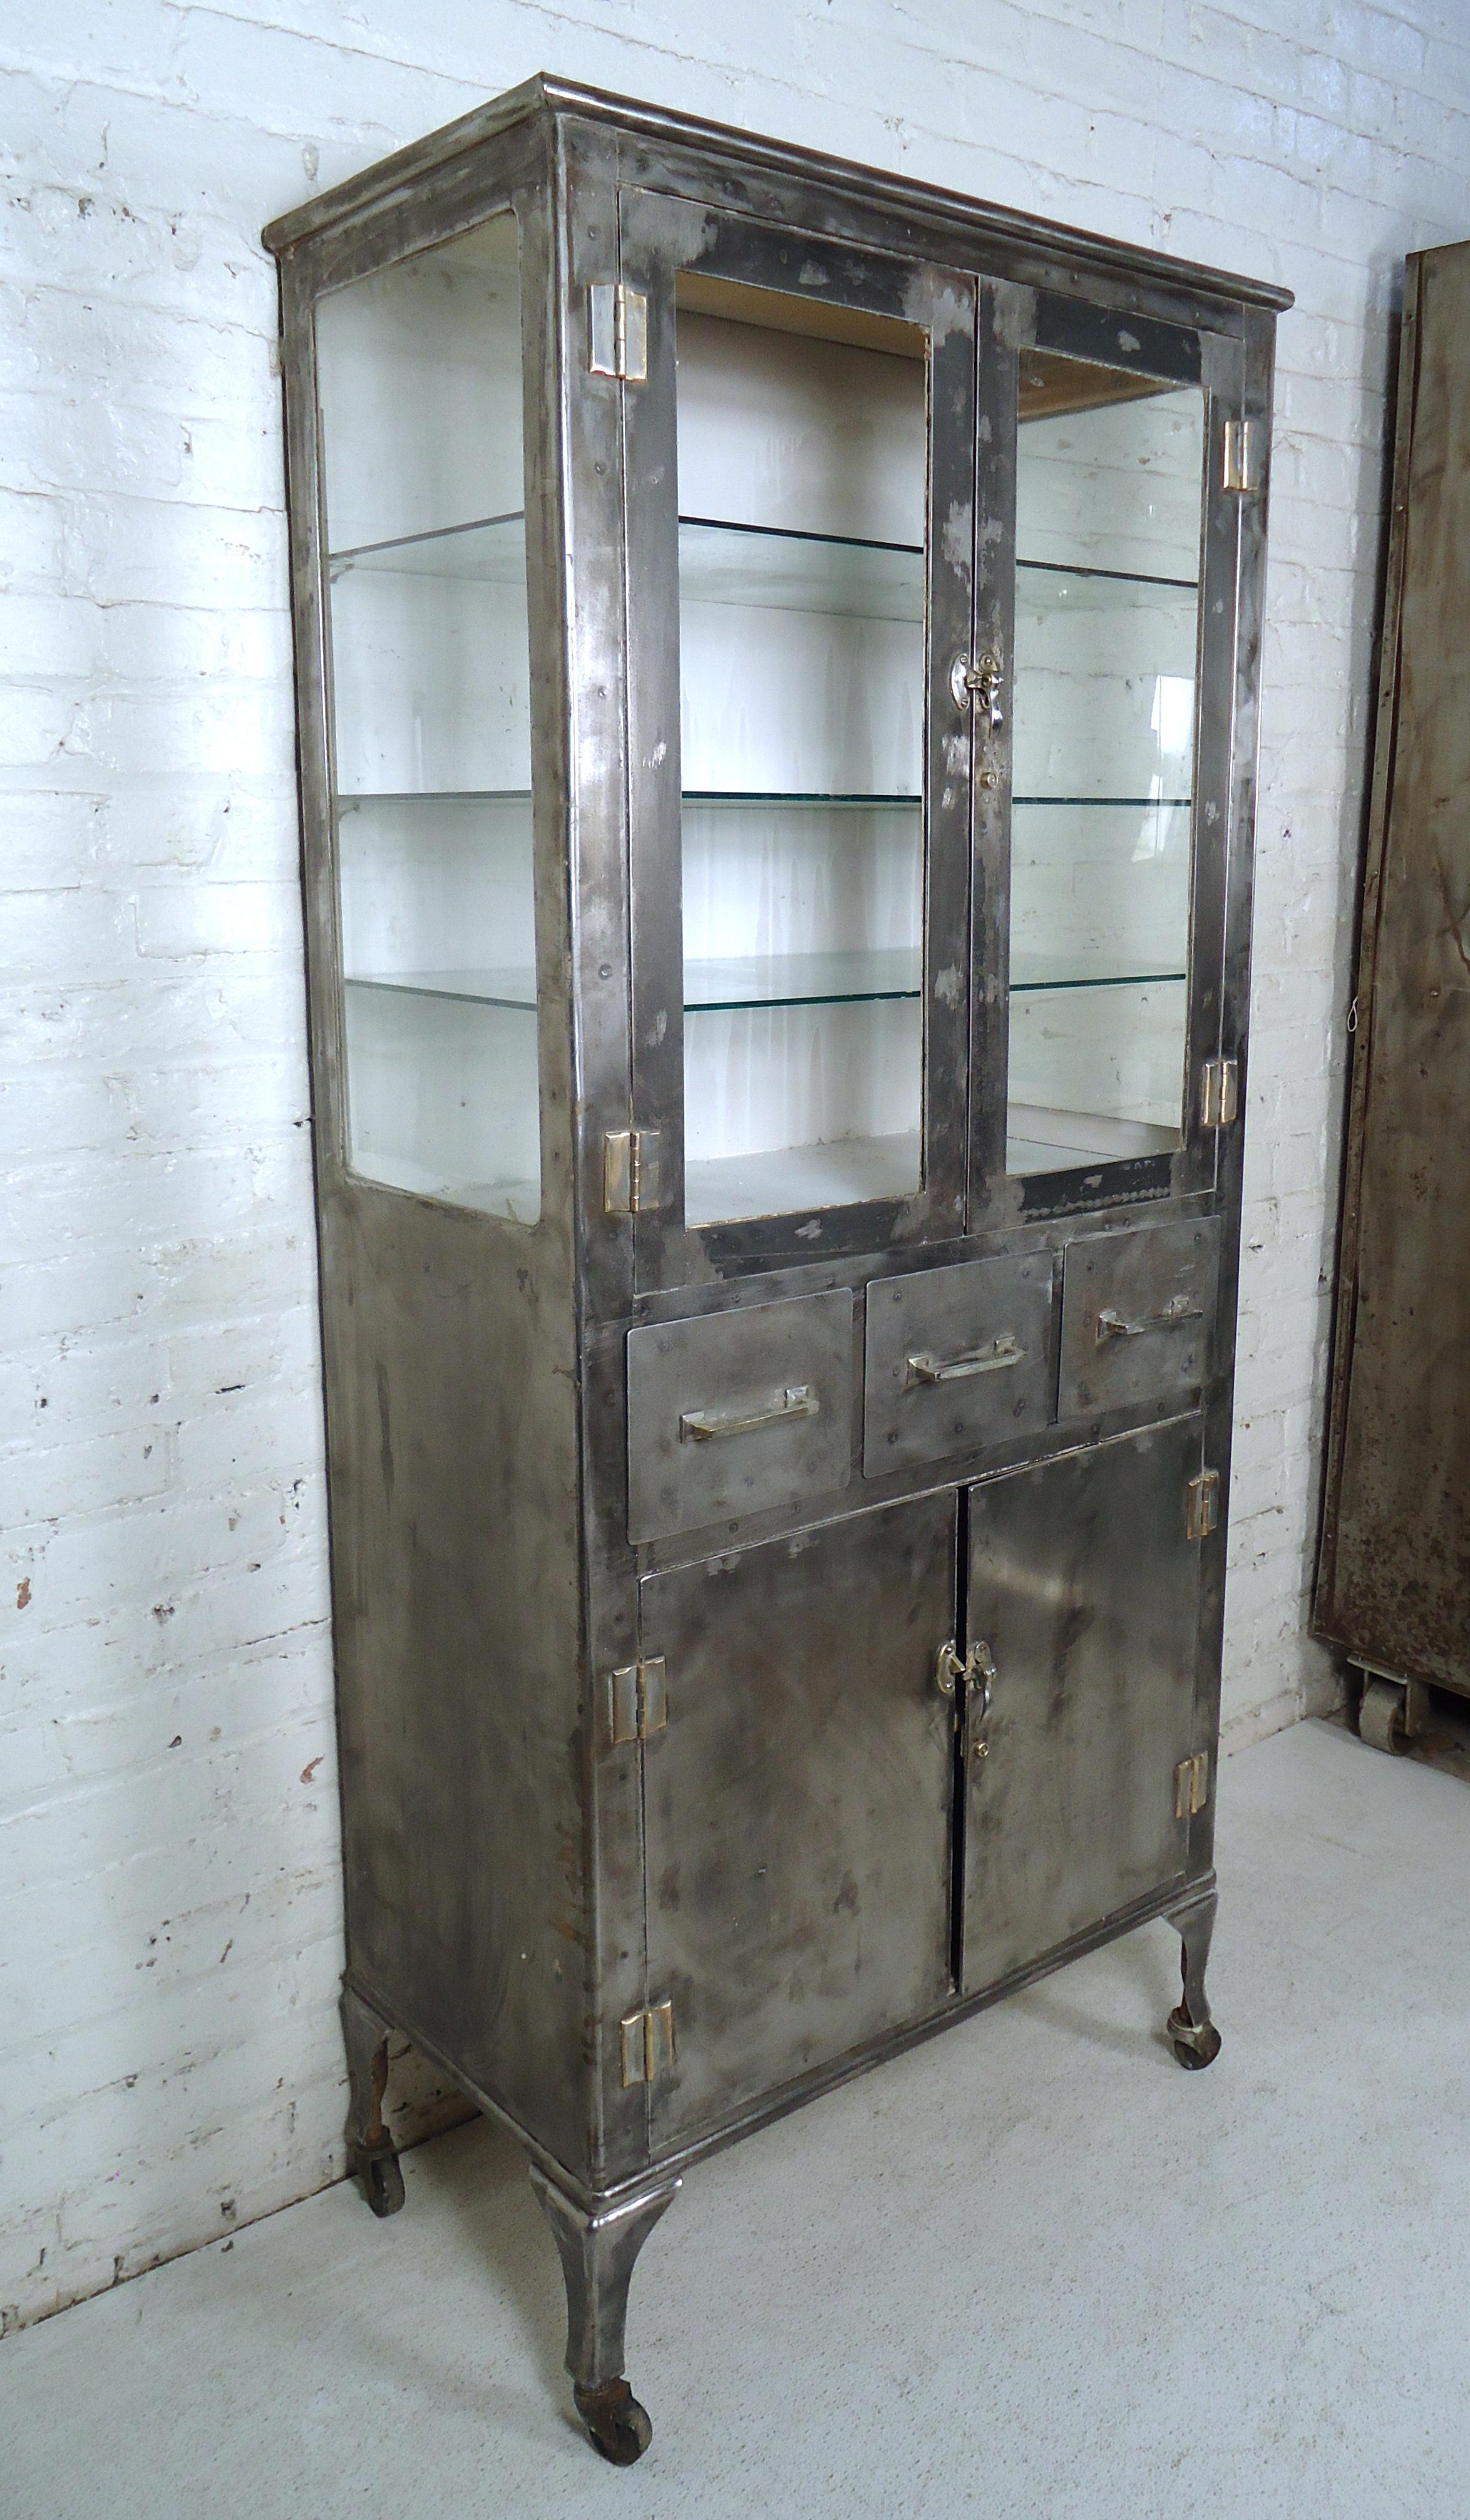 Vintage metal Doctor's cabinet, refinished in an industrial finish. Striking bare metal finish with glass sides and shelves. Rolling wheels and adjustable shelves. 

(Please confirm item location - NY or NJ - with dealer).